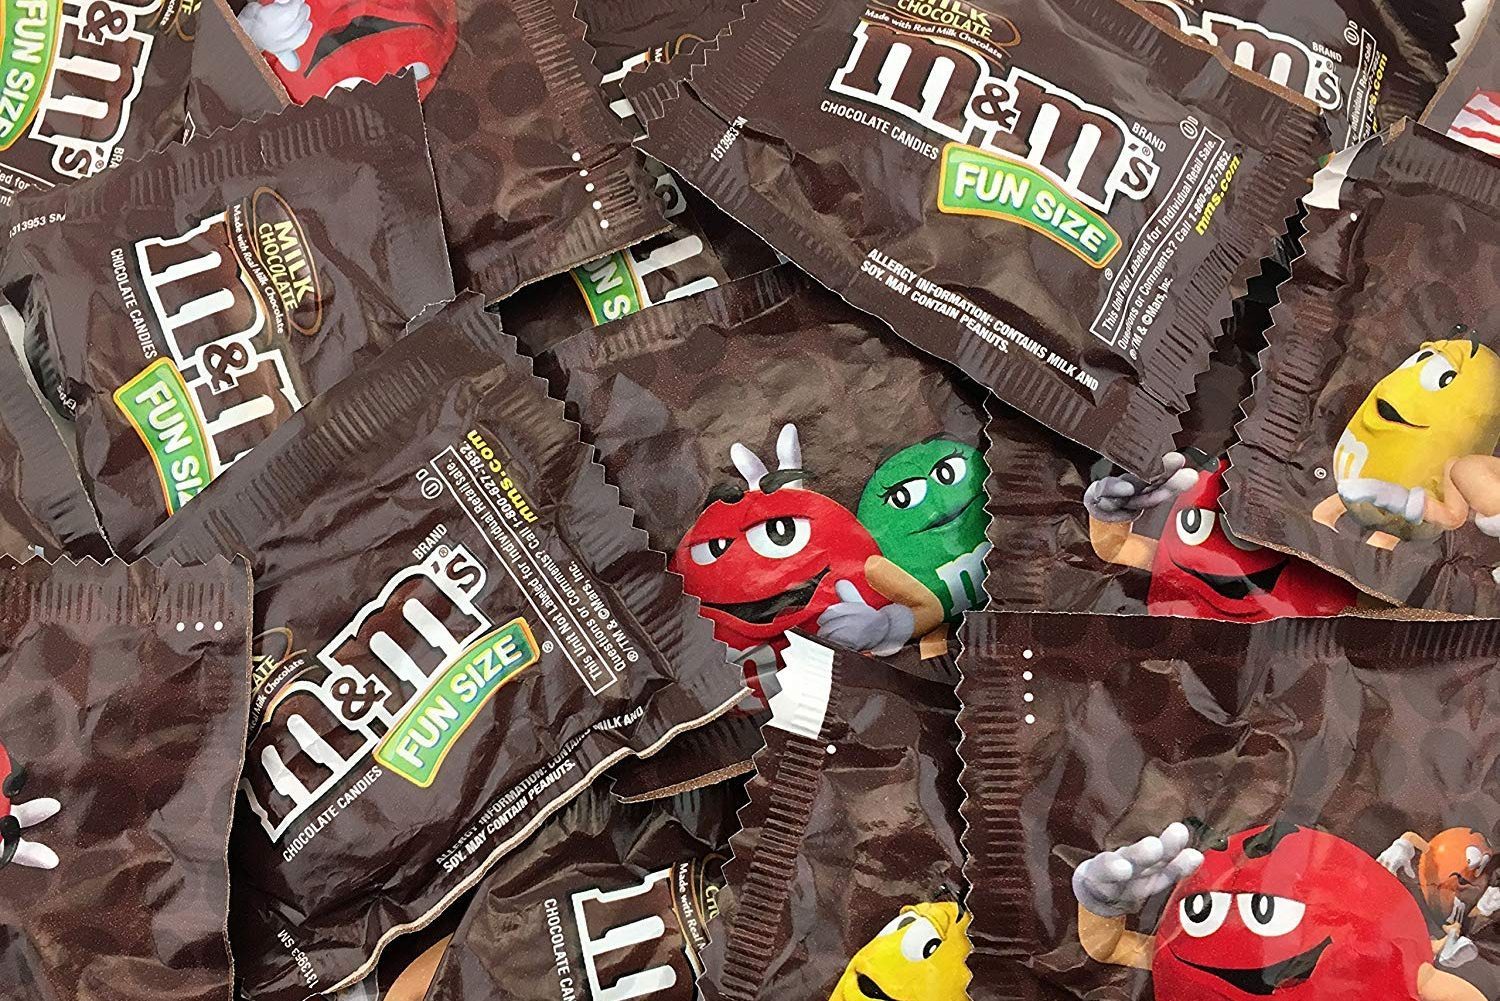 Tasty facts you might not know about M&M's